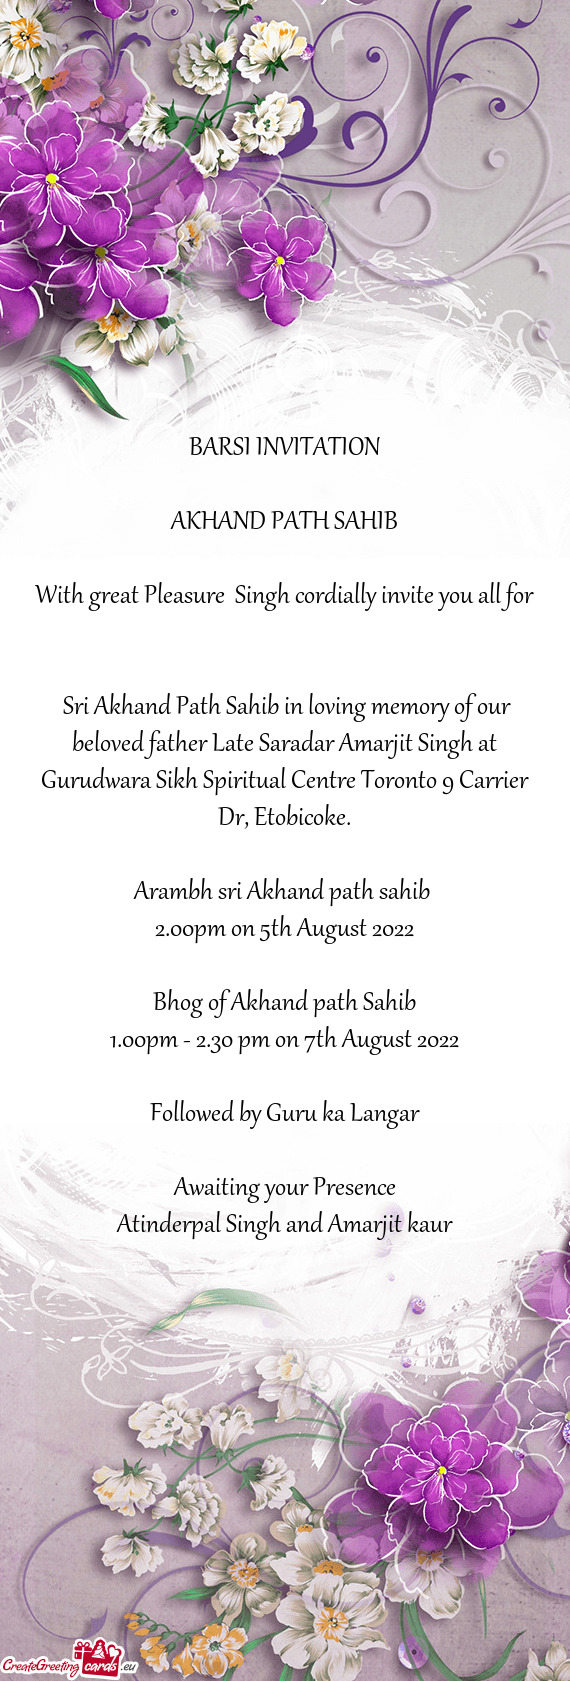 With great Pleasure Singh cordially invite you all for